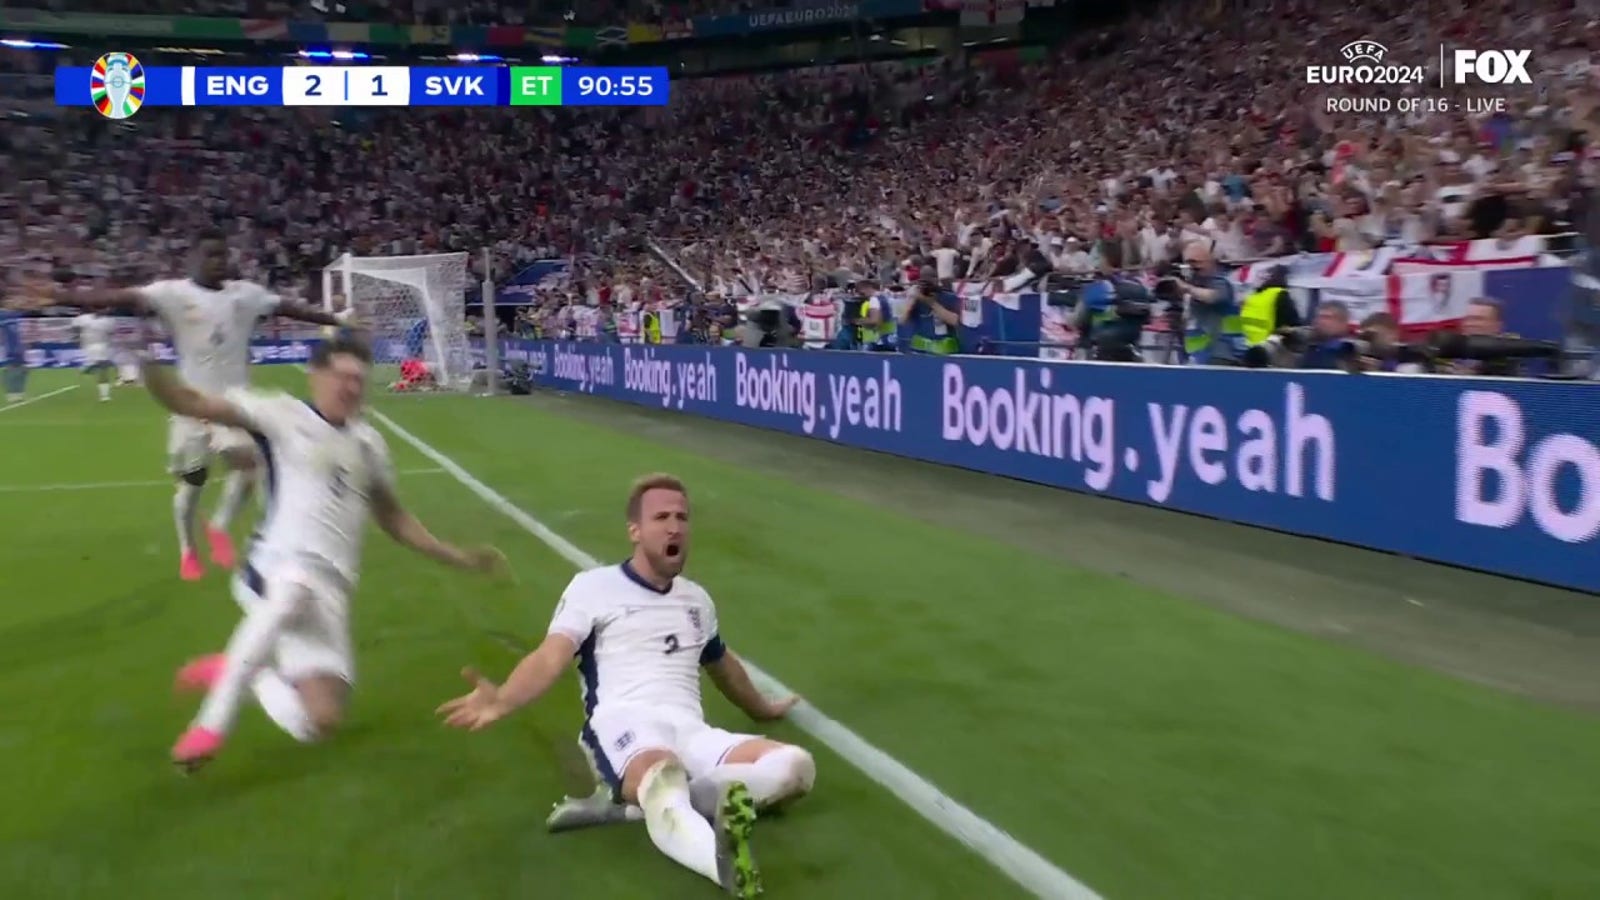 Harry Kane scores in extra time as England takes a 2-1 lead over Slovakia | UEFA Euro 2024